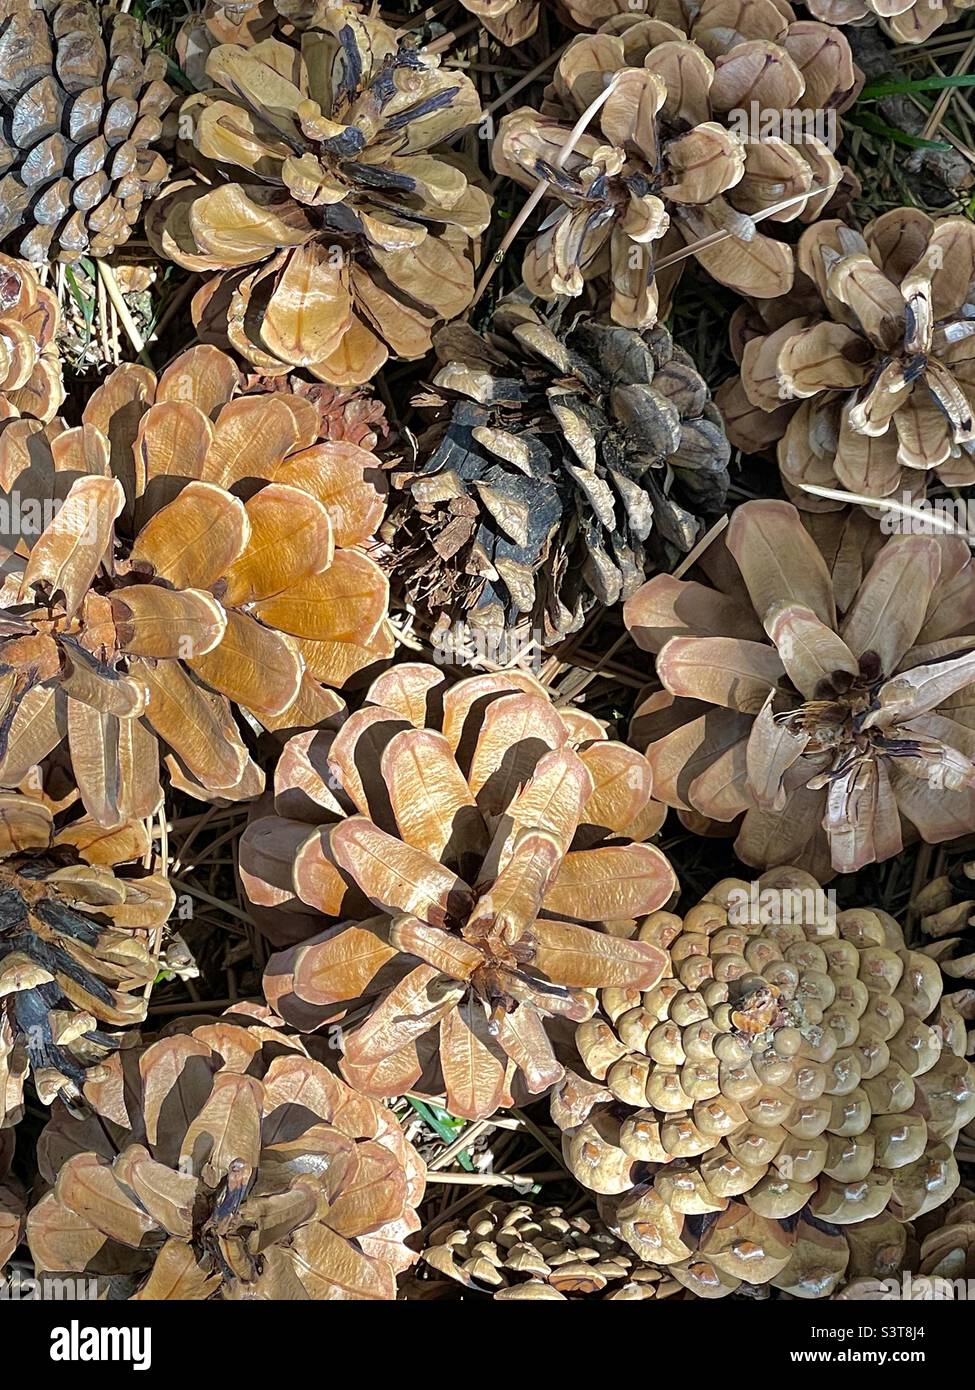 A grouping of fallen pine cones taken close up makes for a pleasing natural abstract image. Stock Photo